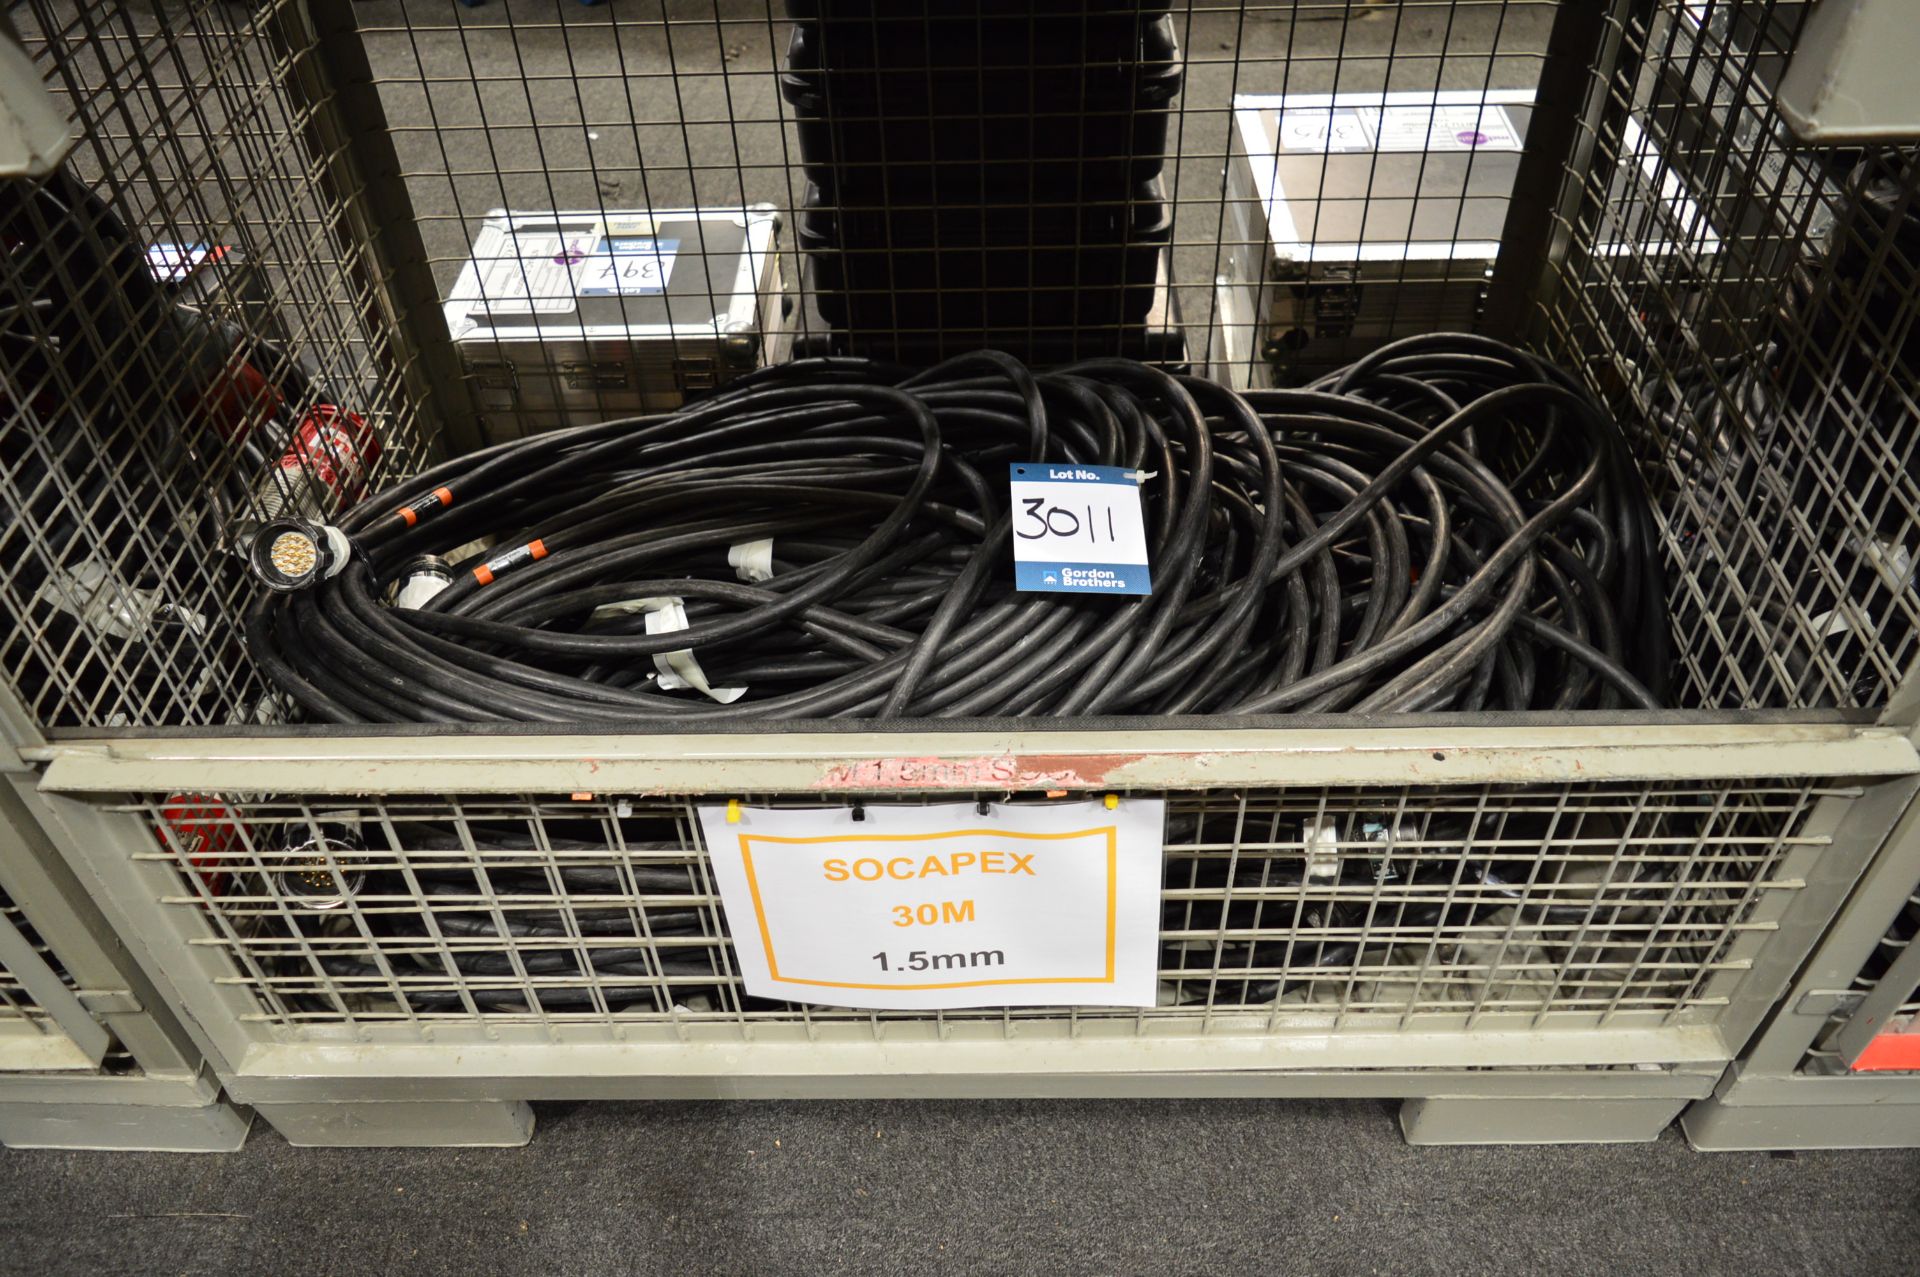 Quantity of 30m / 1.5mm Socapex cables (stillage not included): Unit 500, Eckersall Road, Birmingham